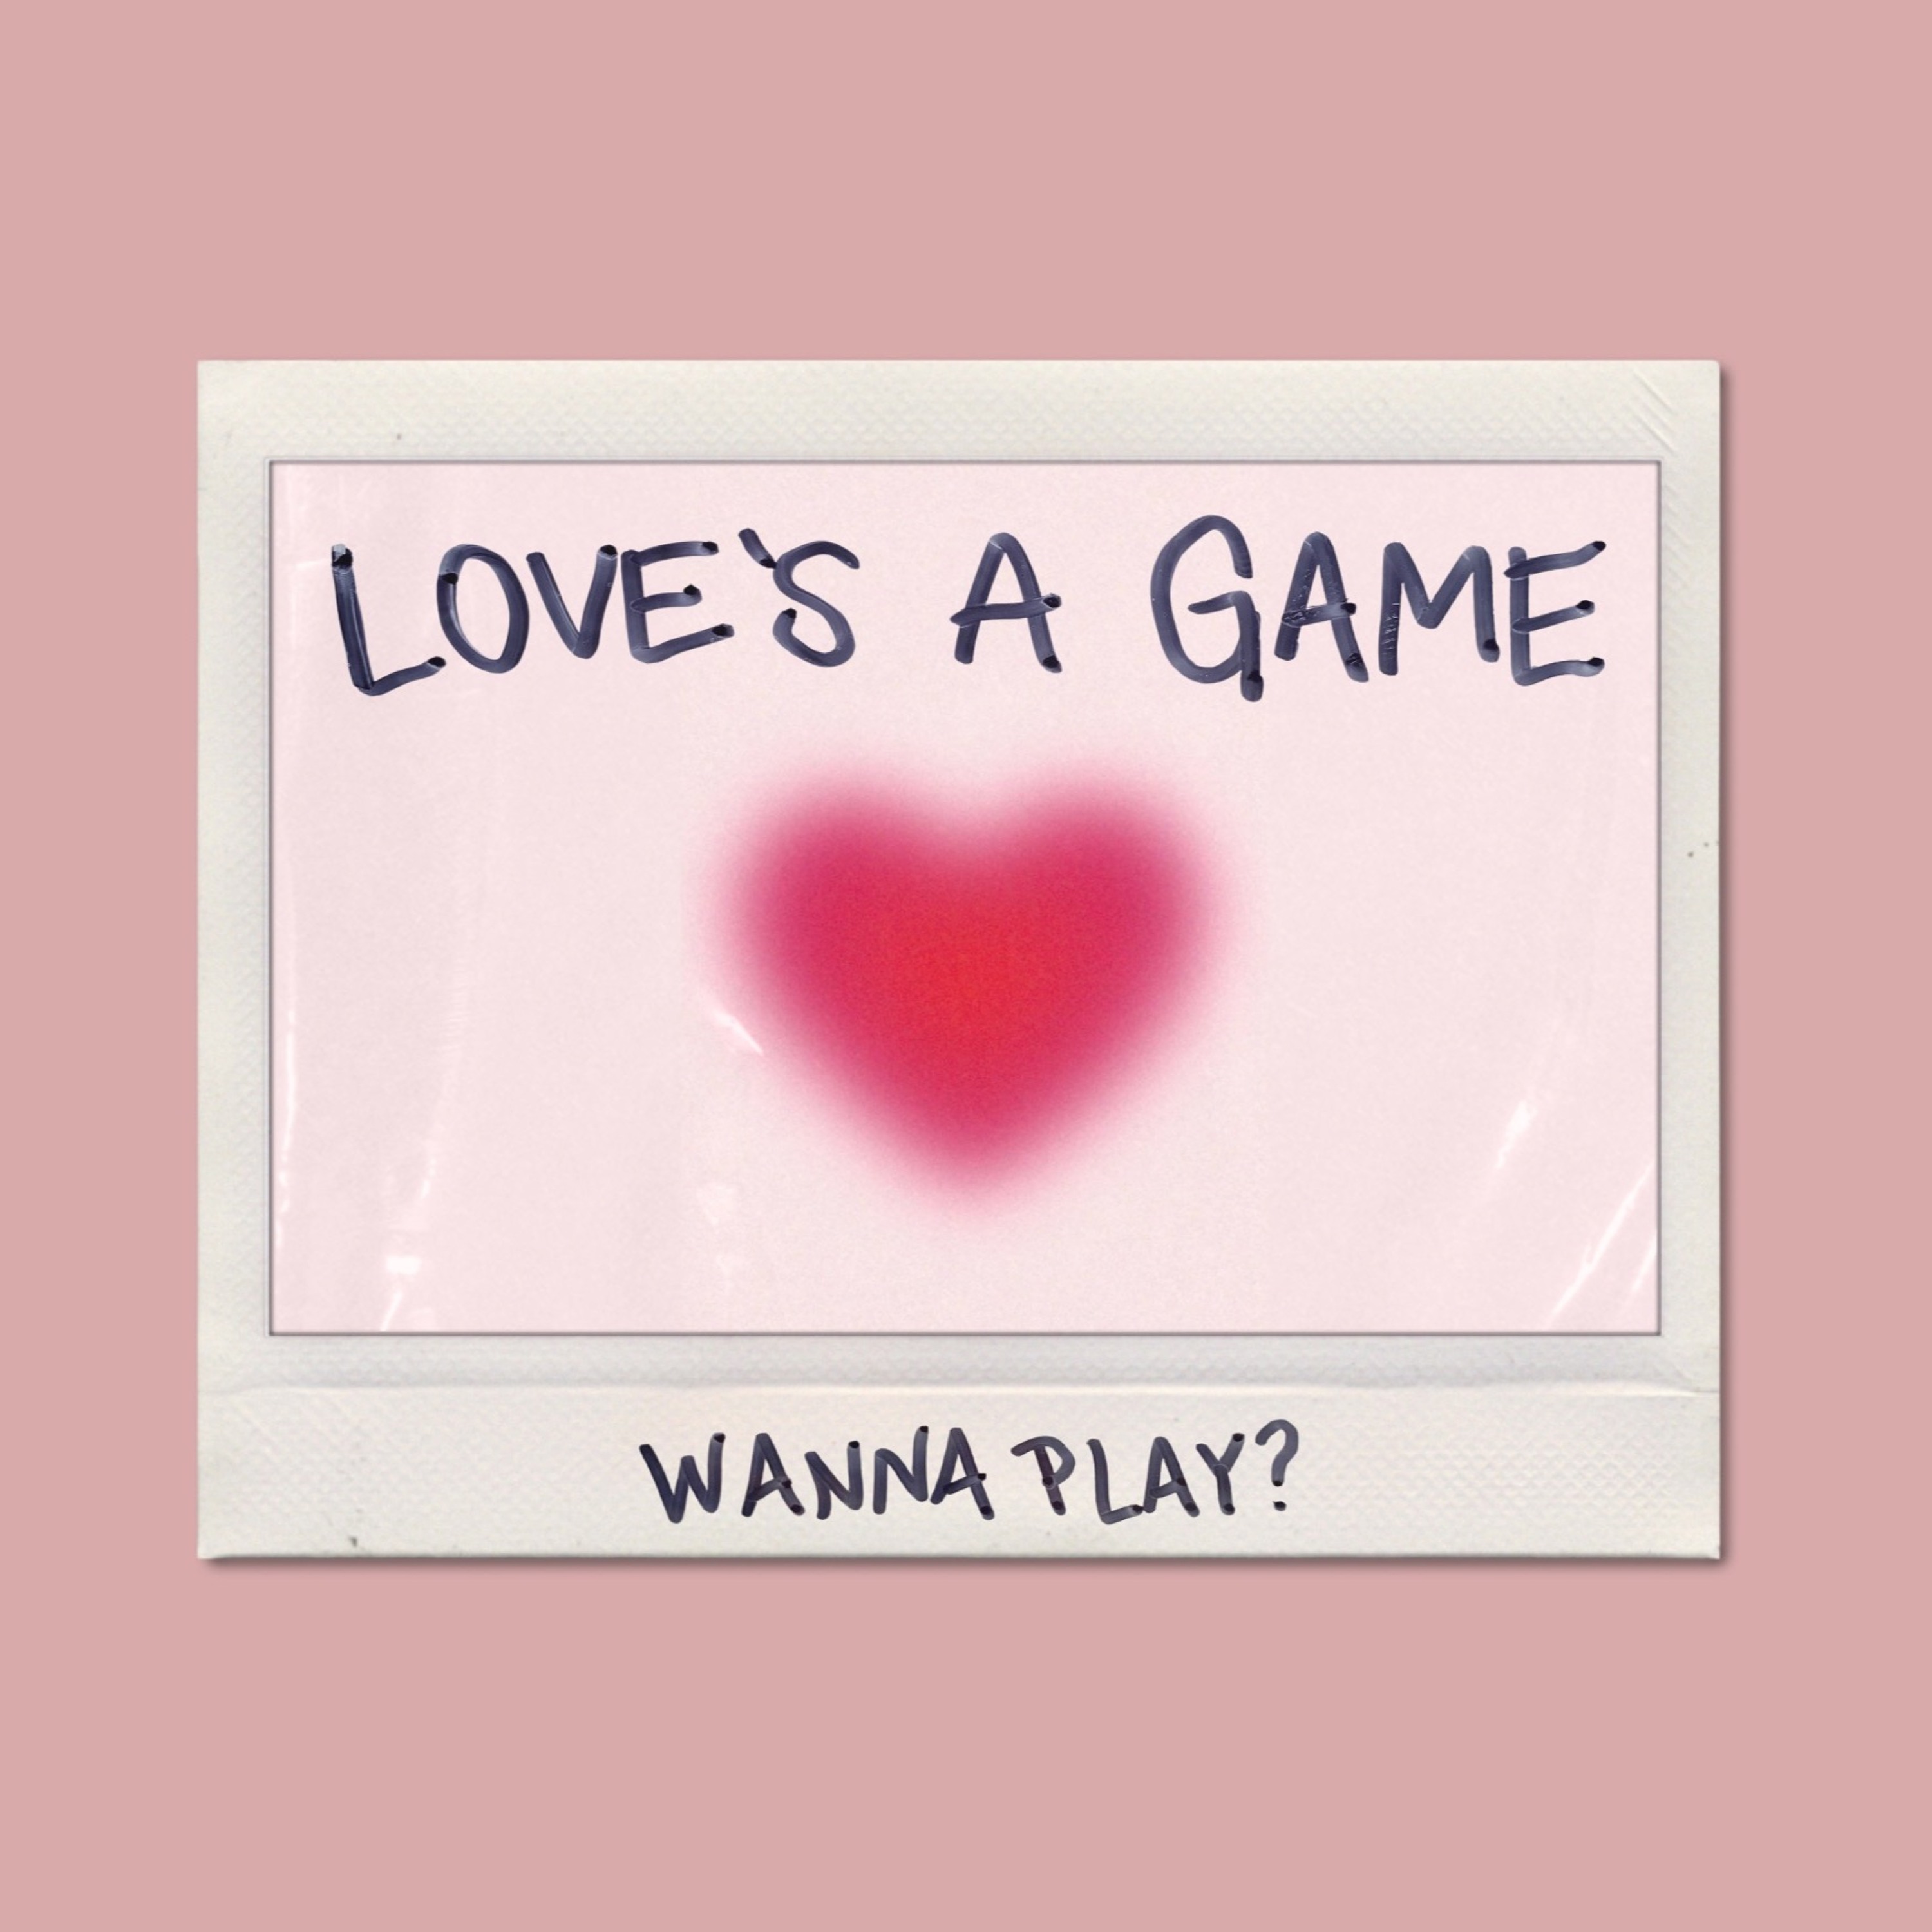 Love’s a Game: Wanna Play? - Winning the Game | Derek Quinby